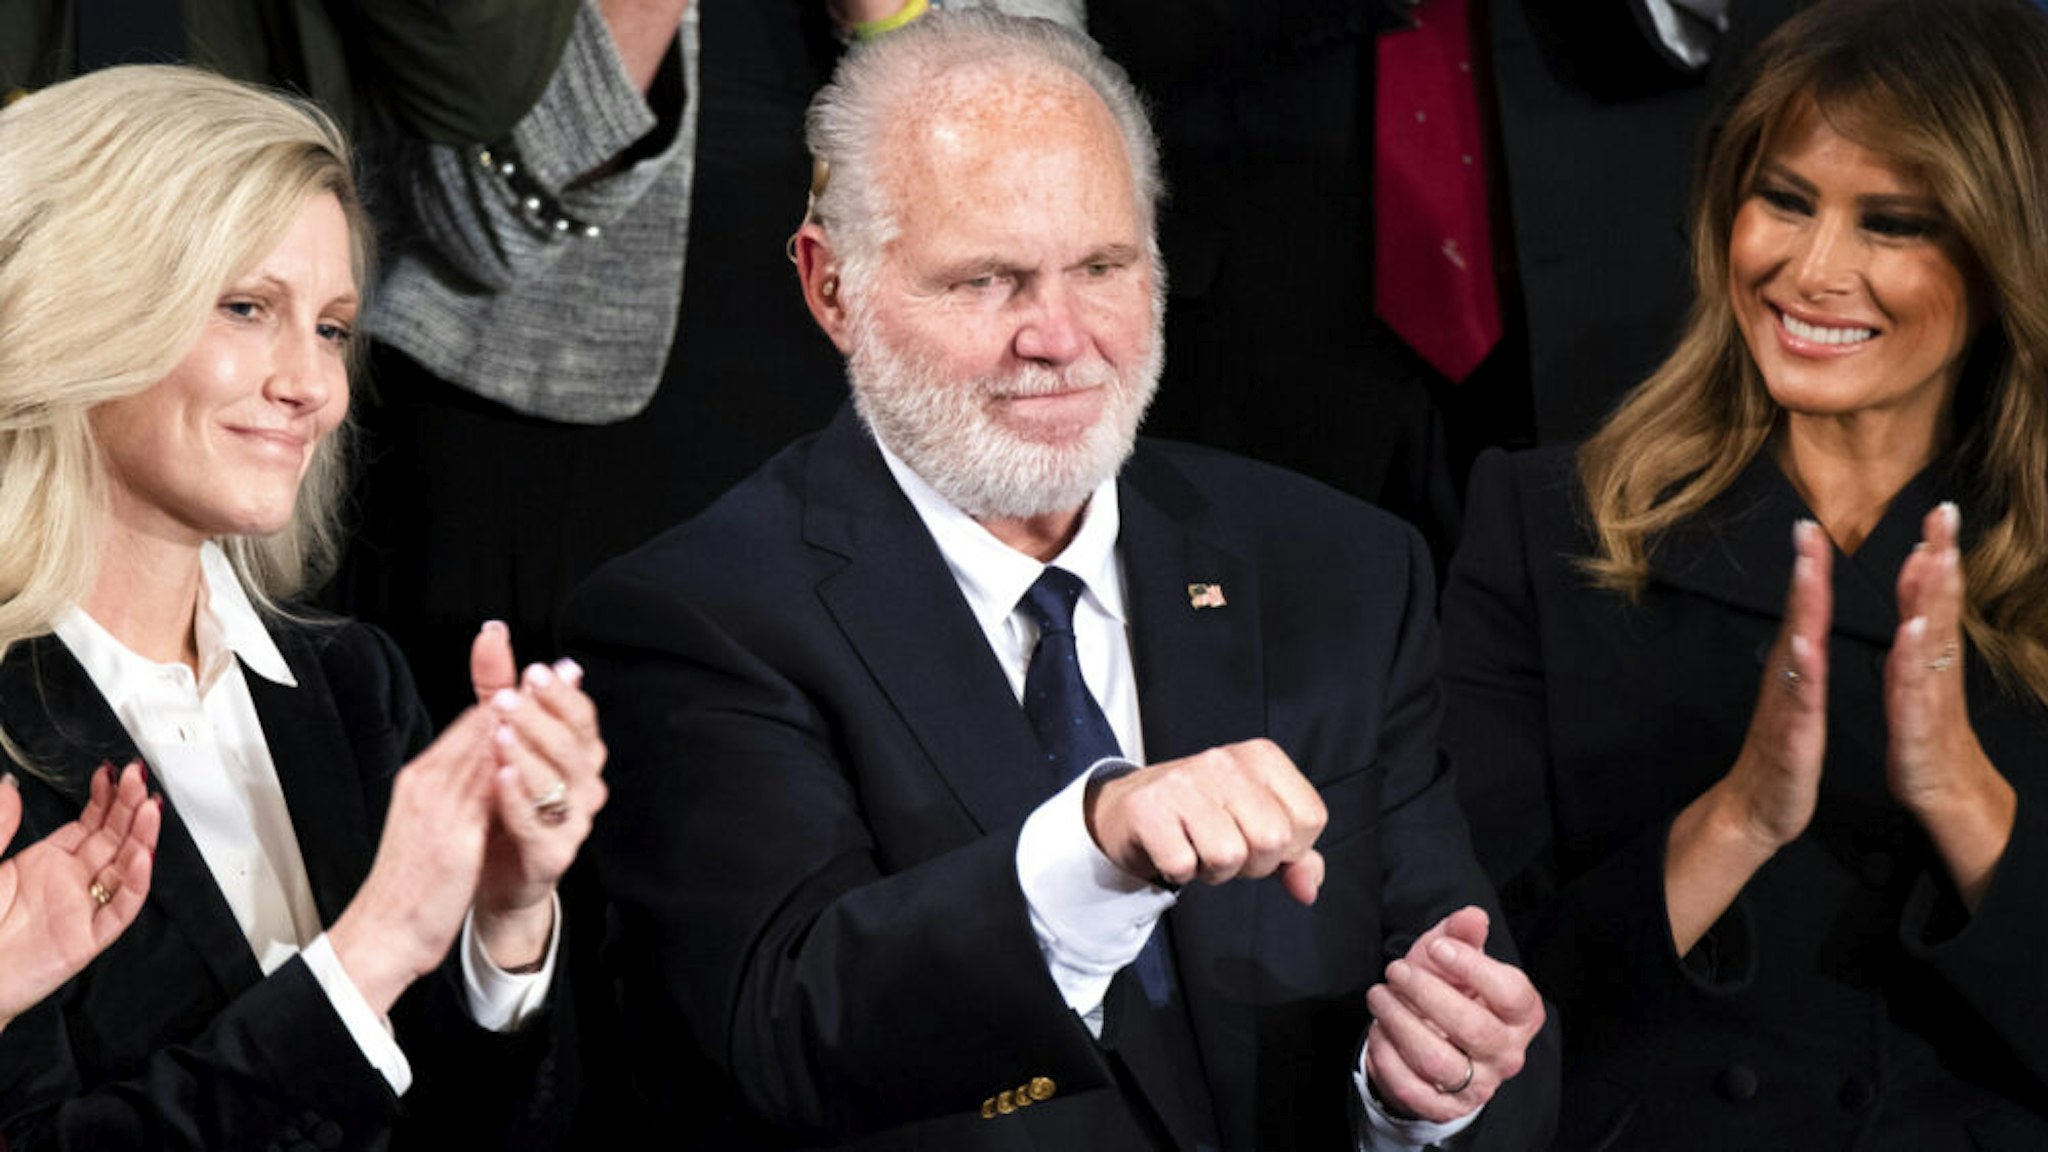 UNITED STATES - FEBRUARY 04: Rush Limbaugh is recognized before First Lady Melania Trump, right, awarded him the Presidential Medal of Freedom during President Donald Trumps State of the Union address in the House Chamber on Tuesday, February 4, 2020.